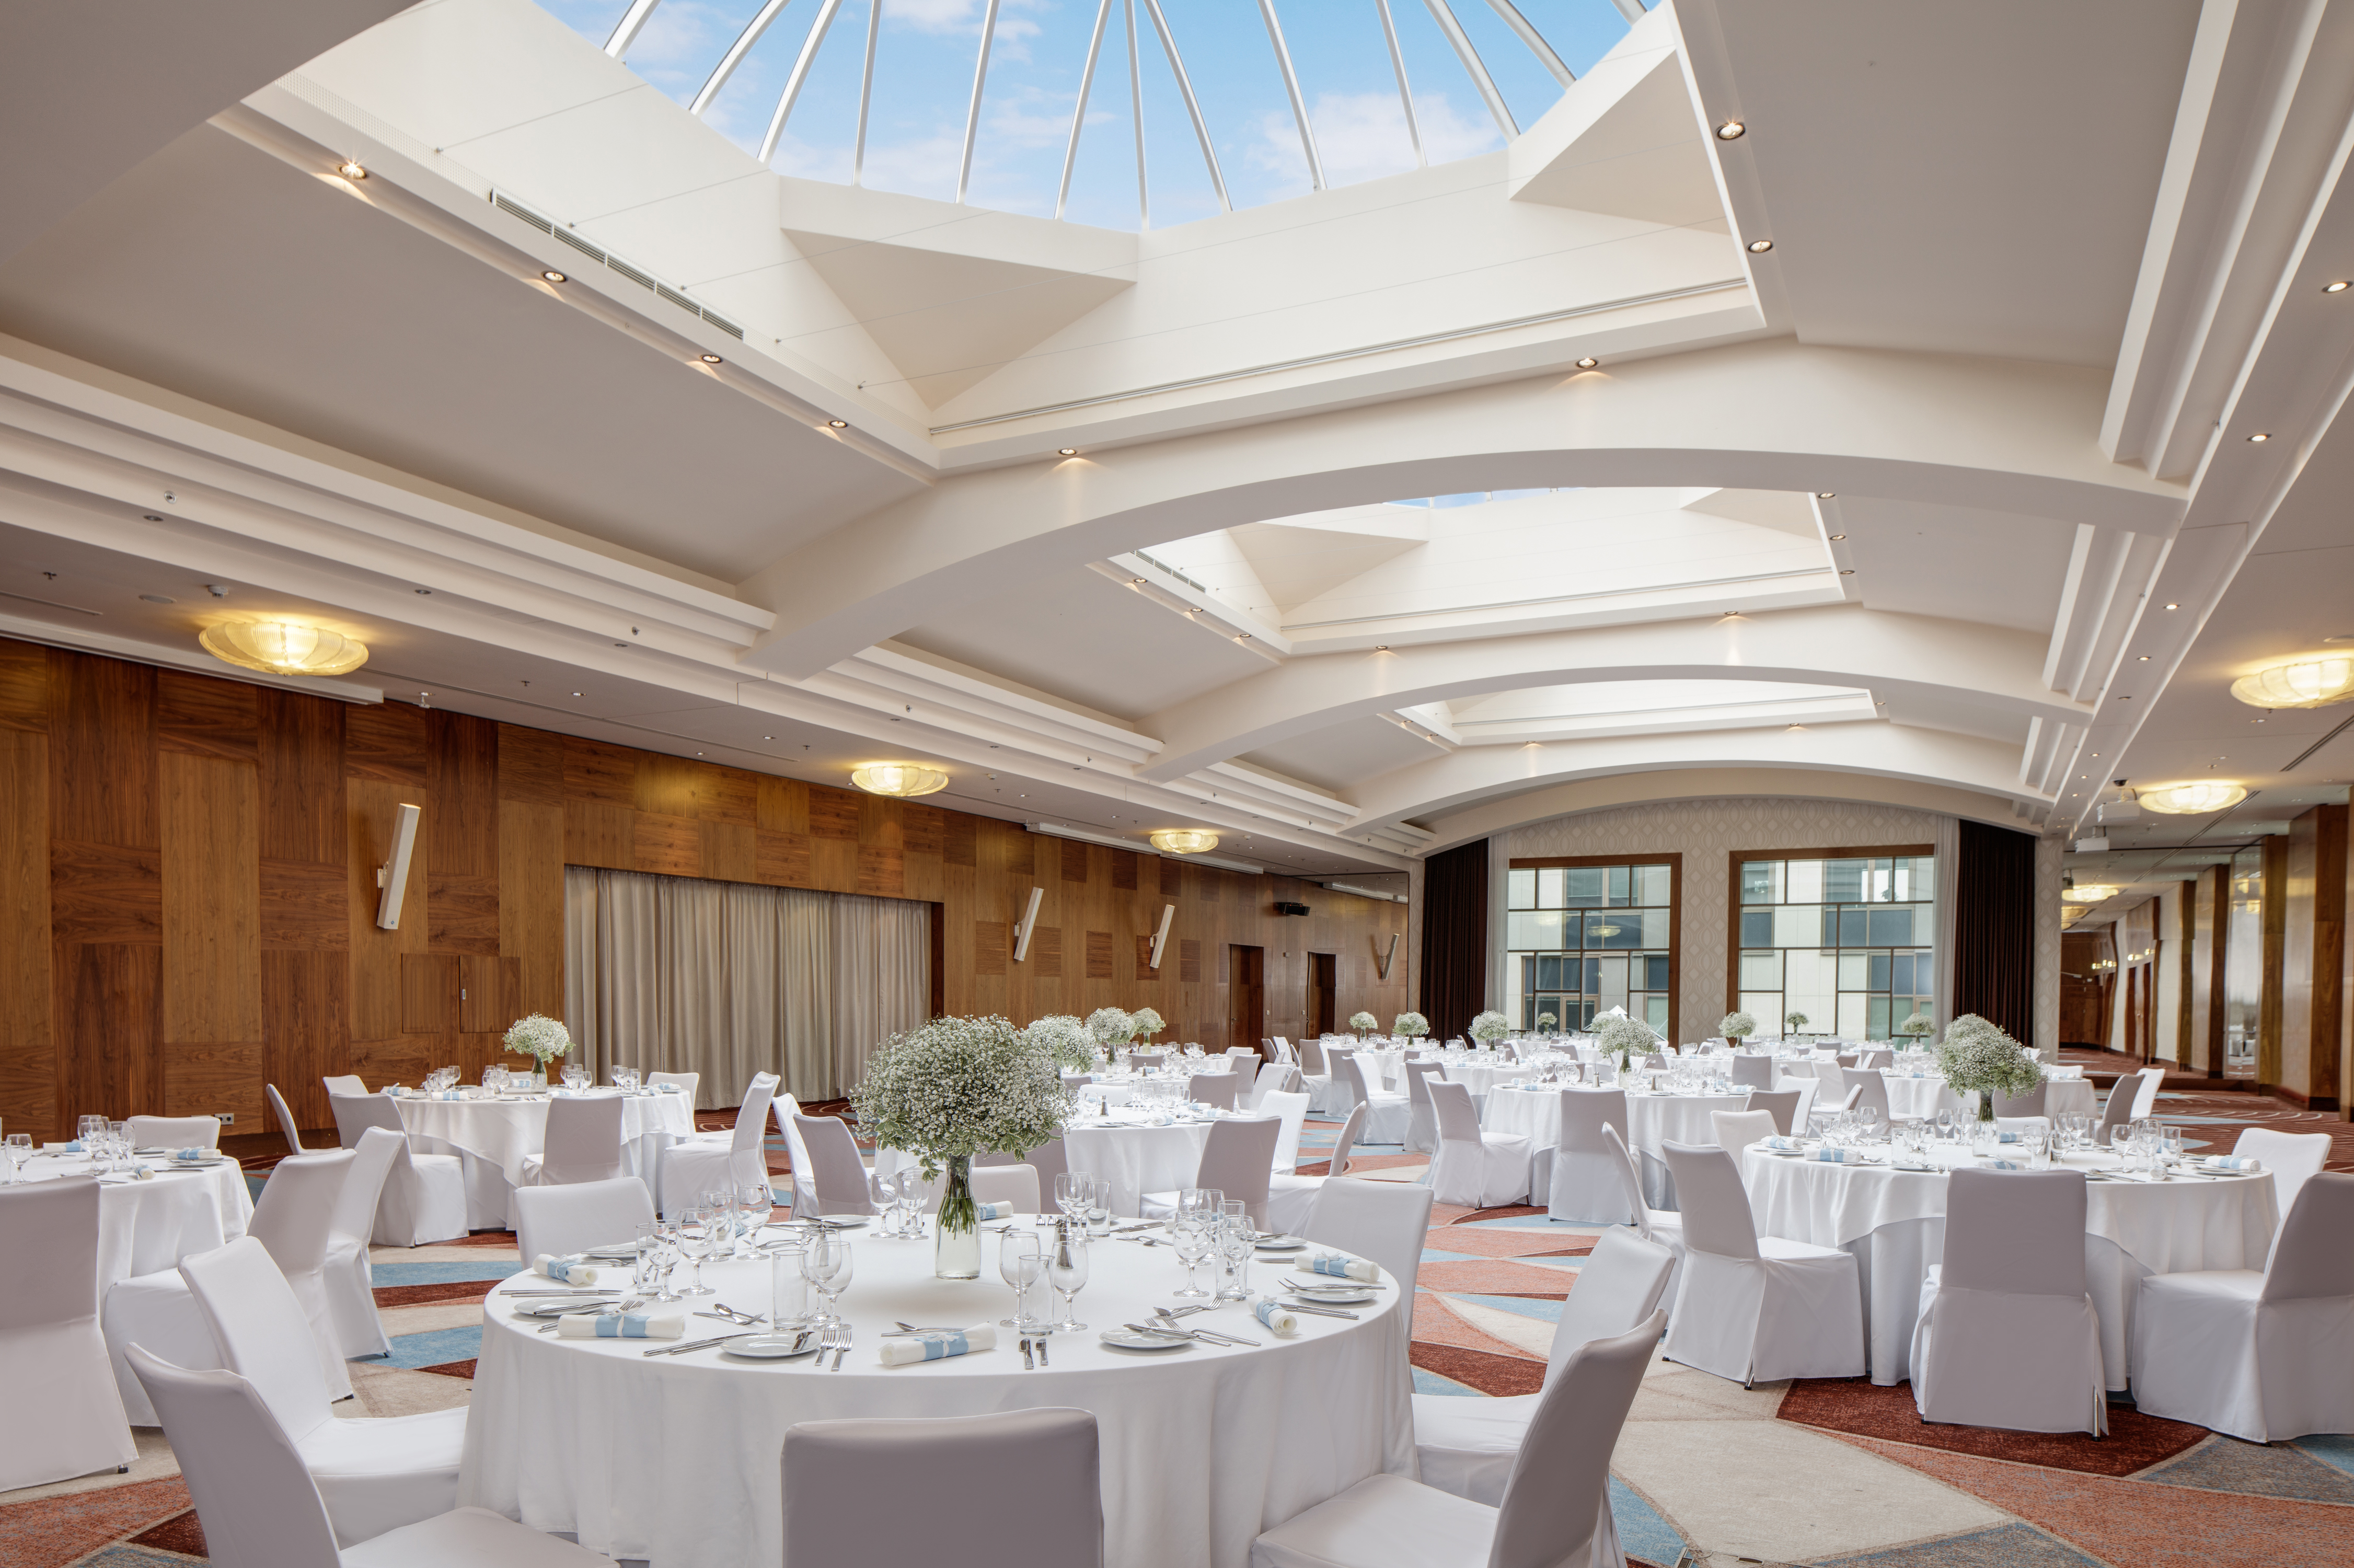 Place Settings and Flowers on Round Dining Tables With White Linens in Hilton Ballroom With Sky Lights